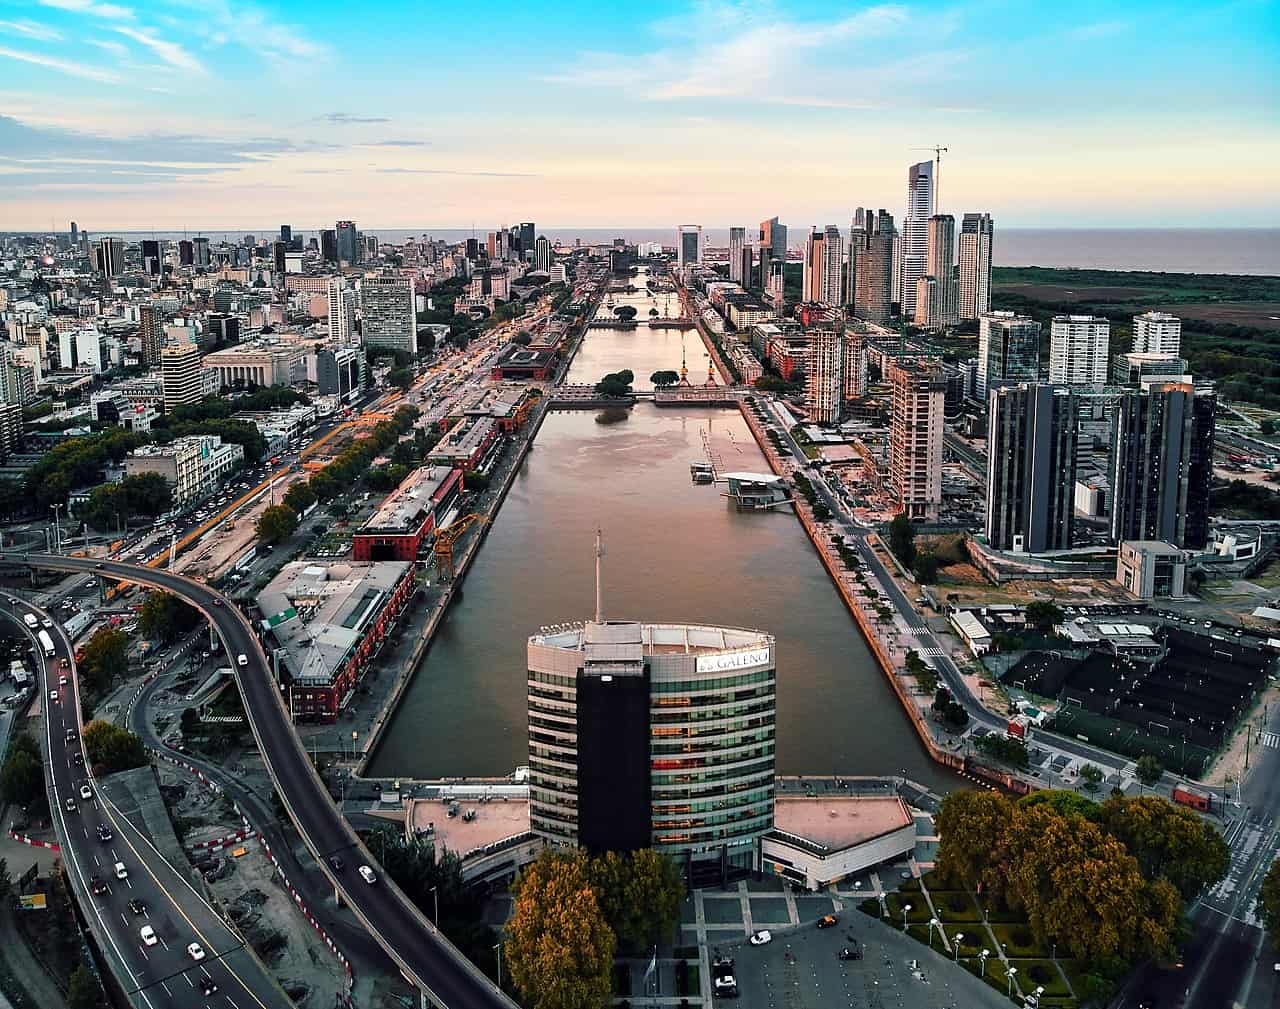 Buenos Aires: Capital city of Argentina